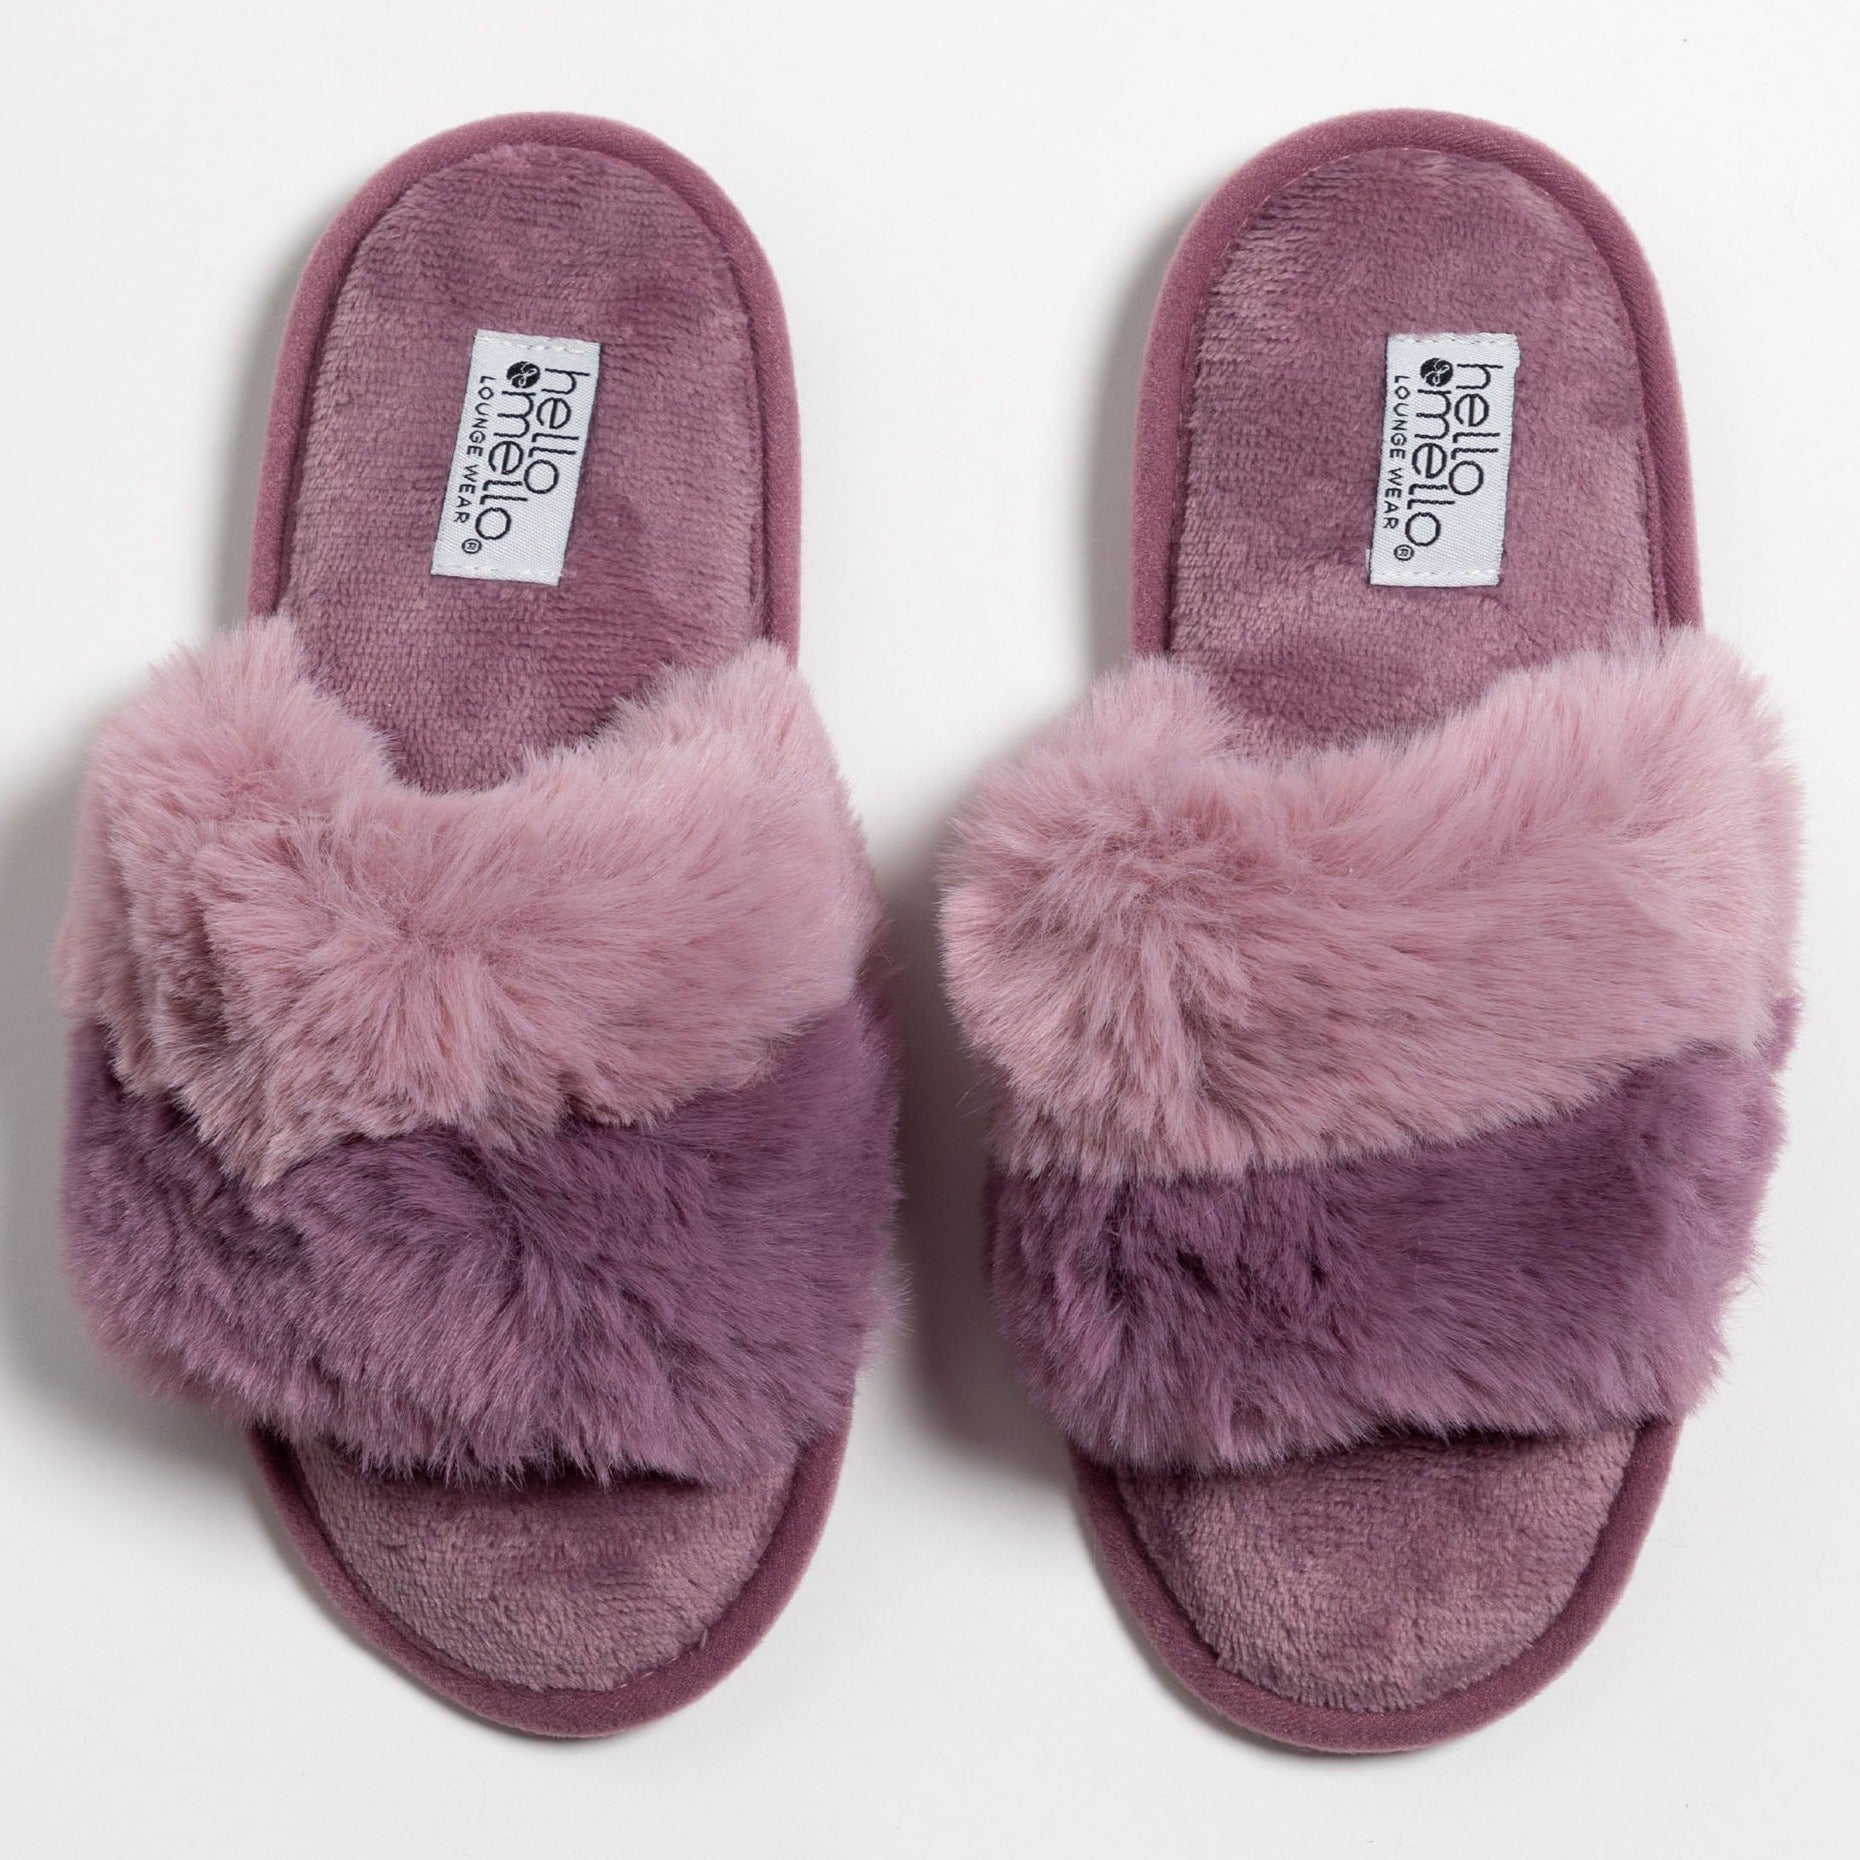 Cotton Candy Puff Slide Slippers - Grape - S/M